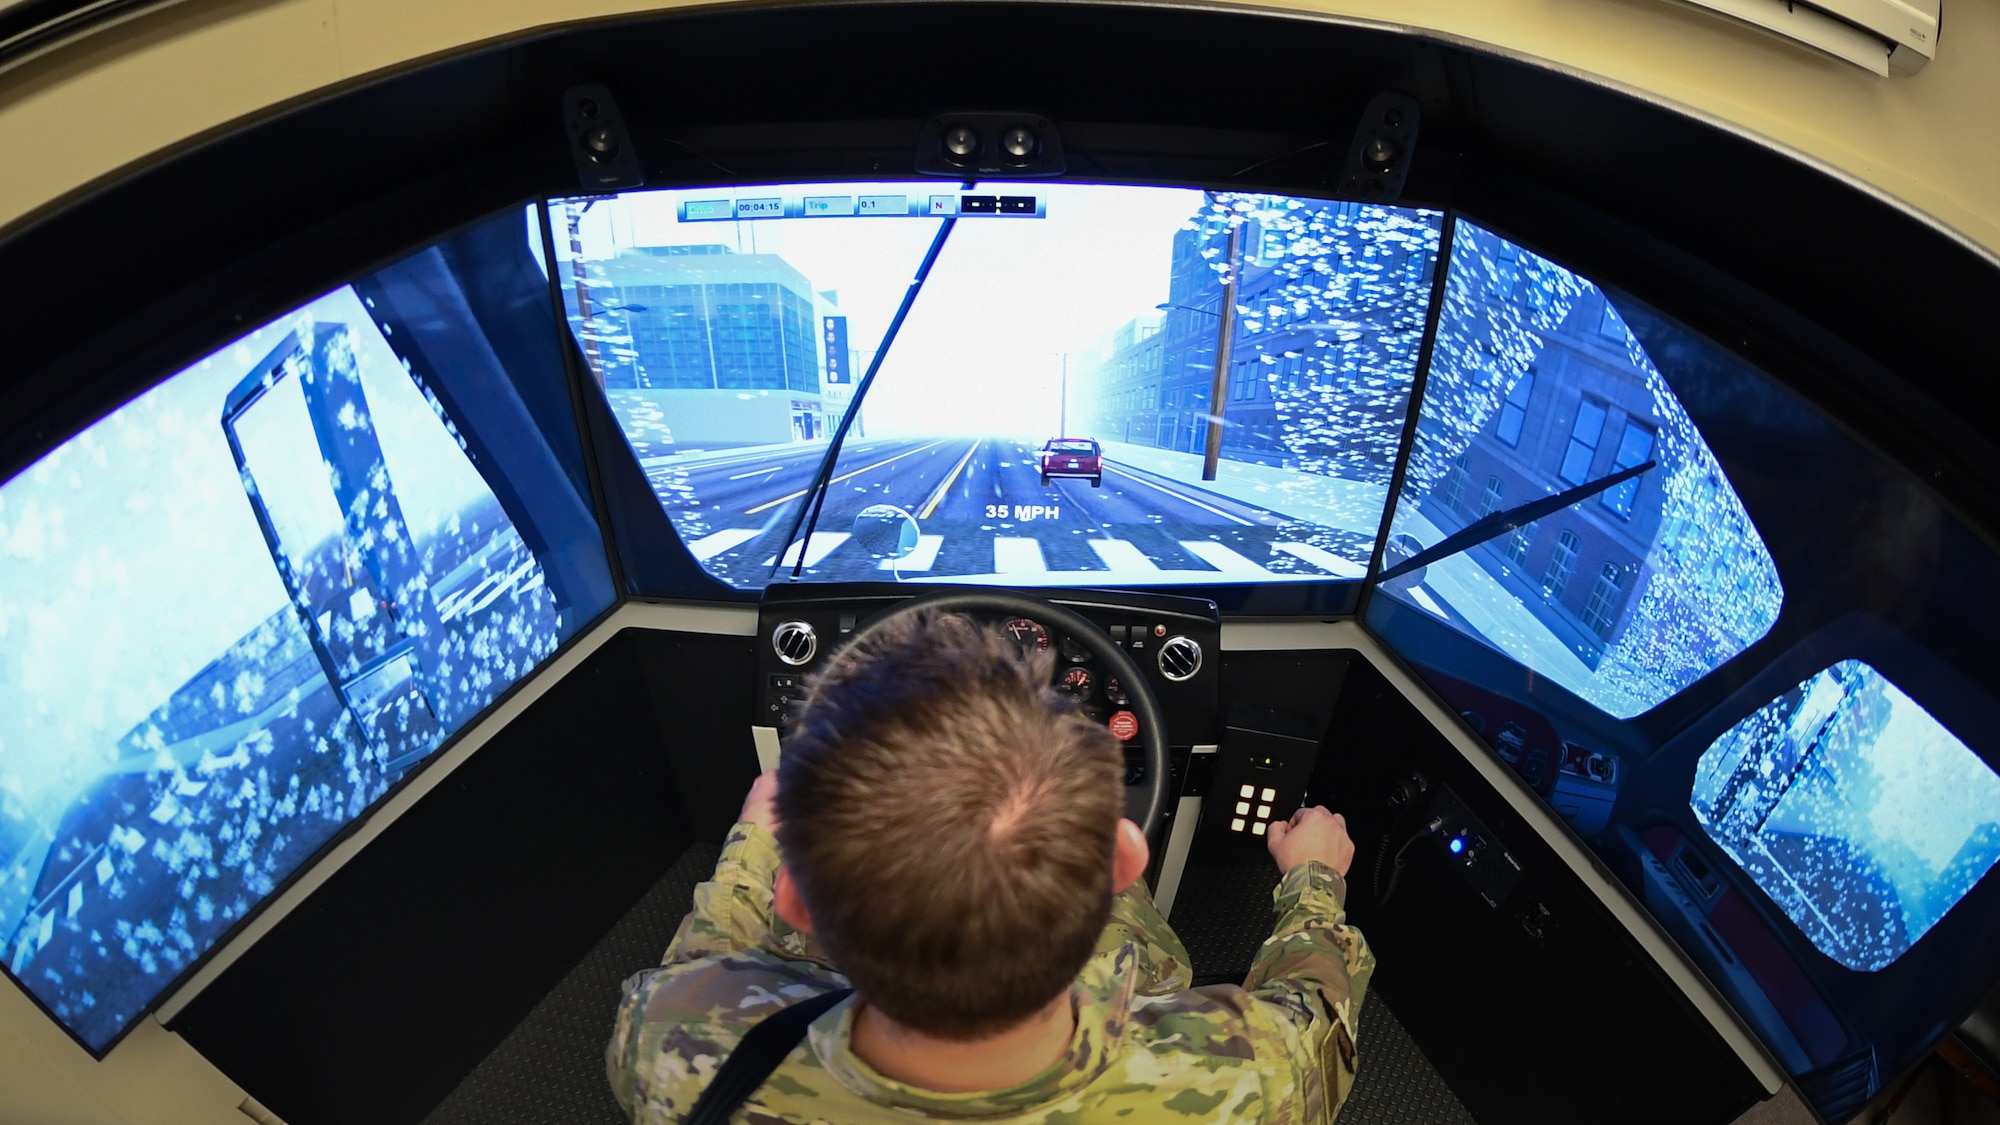 Staff Sgt. Andrew Bagley, training validation and operation NCOIC for the 75th Logistics Readiness Squadron, practices driving in rain on the unit's new vehicle training simulator.  Drivers can use the state-of-the-art simulator to practice on about 30 different vehicles in nearly every driving condition imaginable.   (U.S. Air Force photos by Cynthia Griggs)